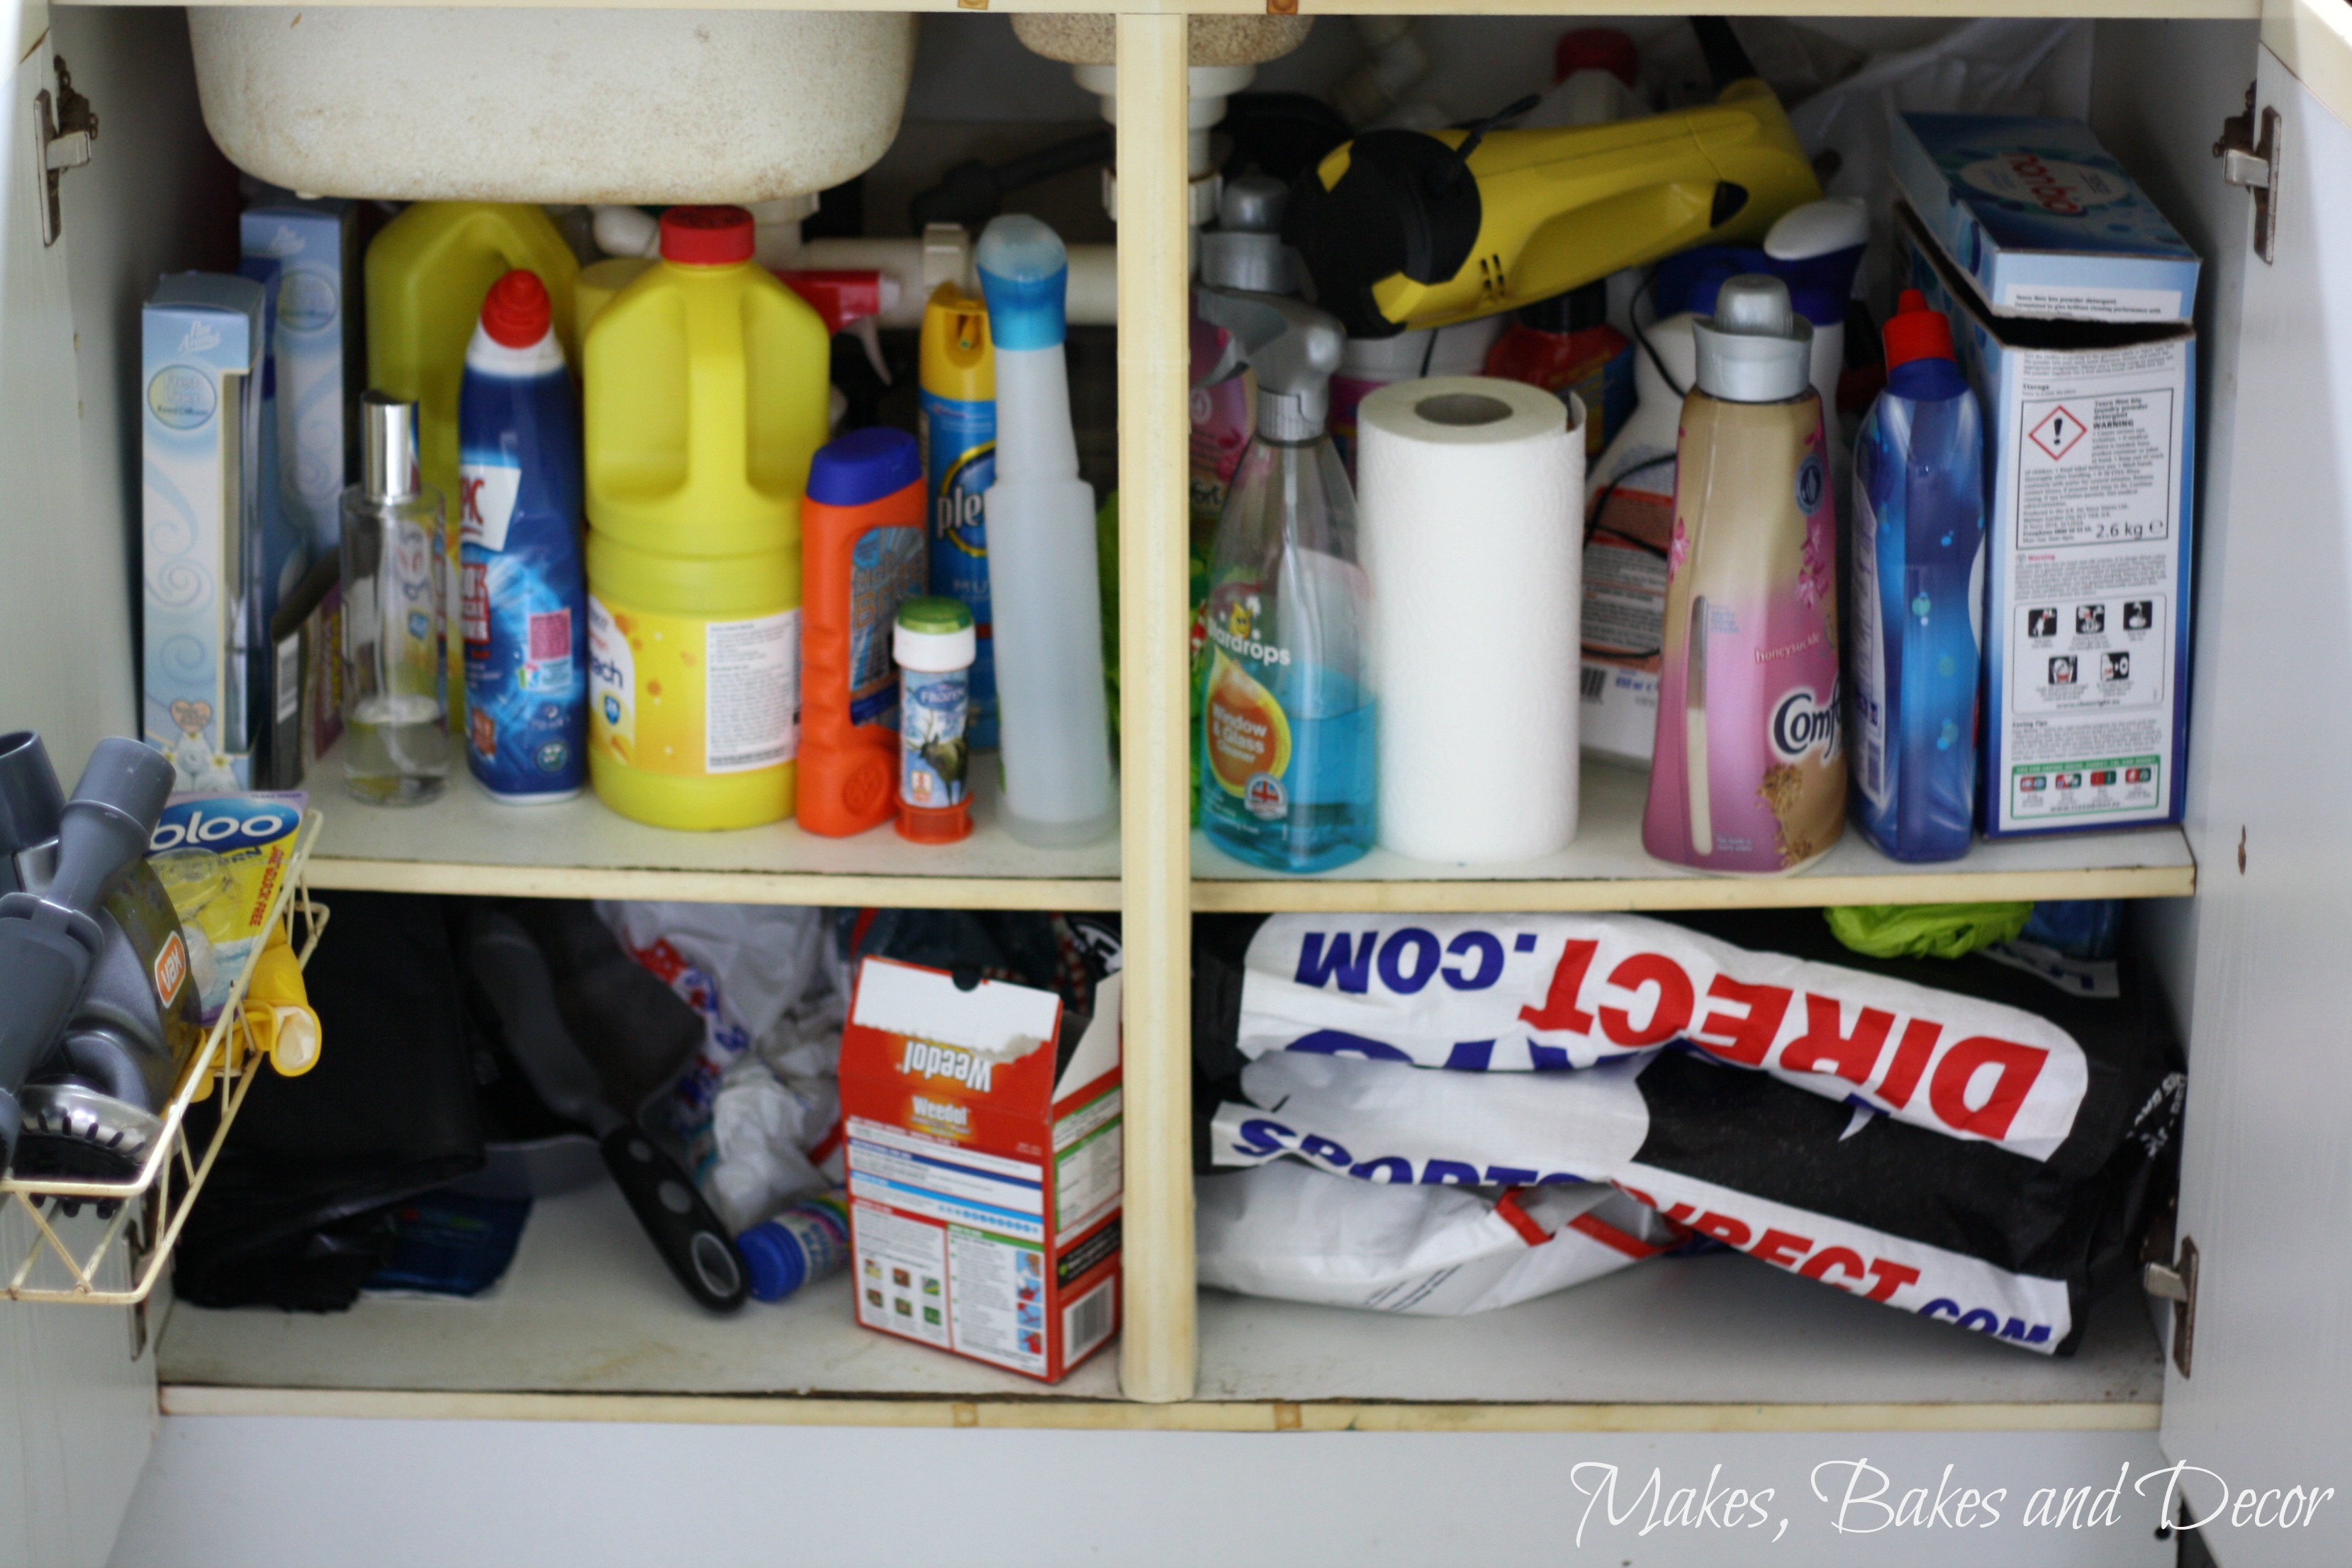 how to organise the cleaning products